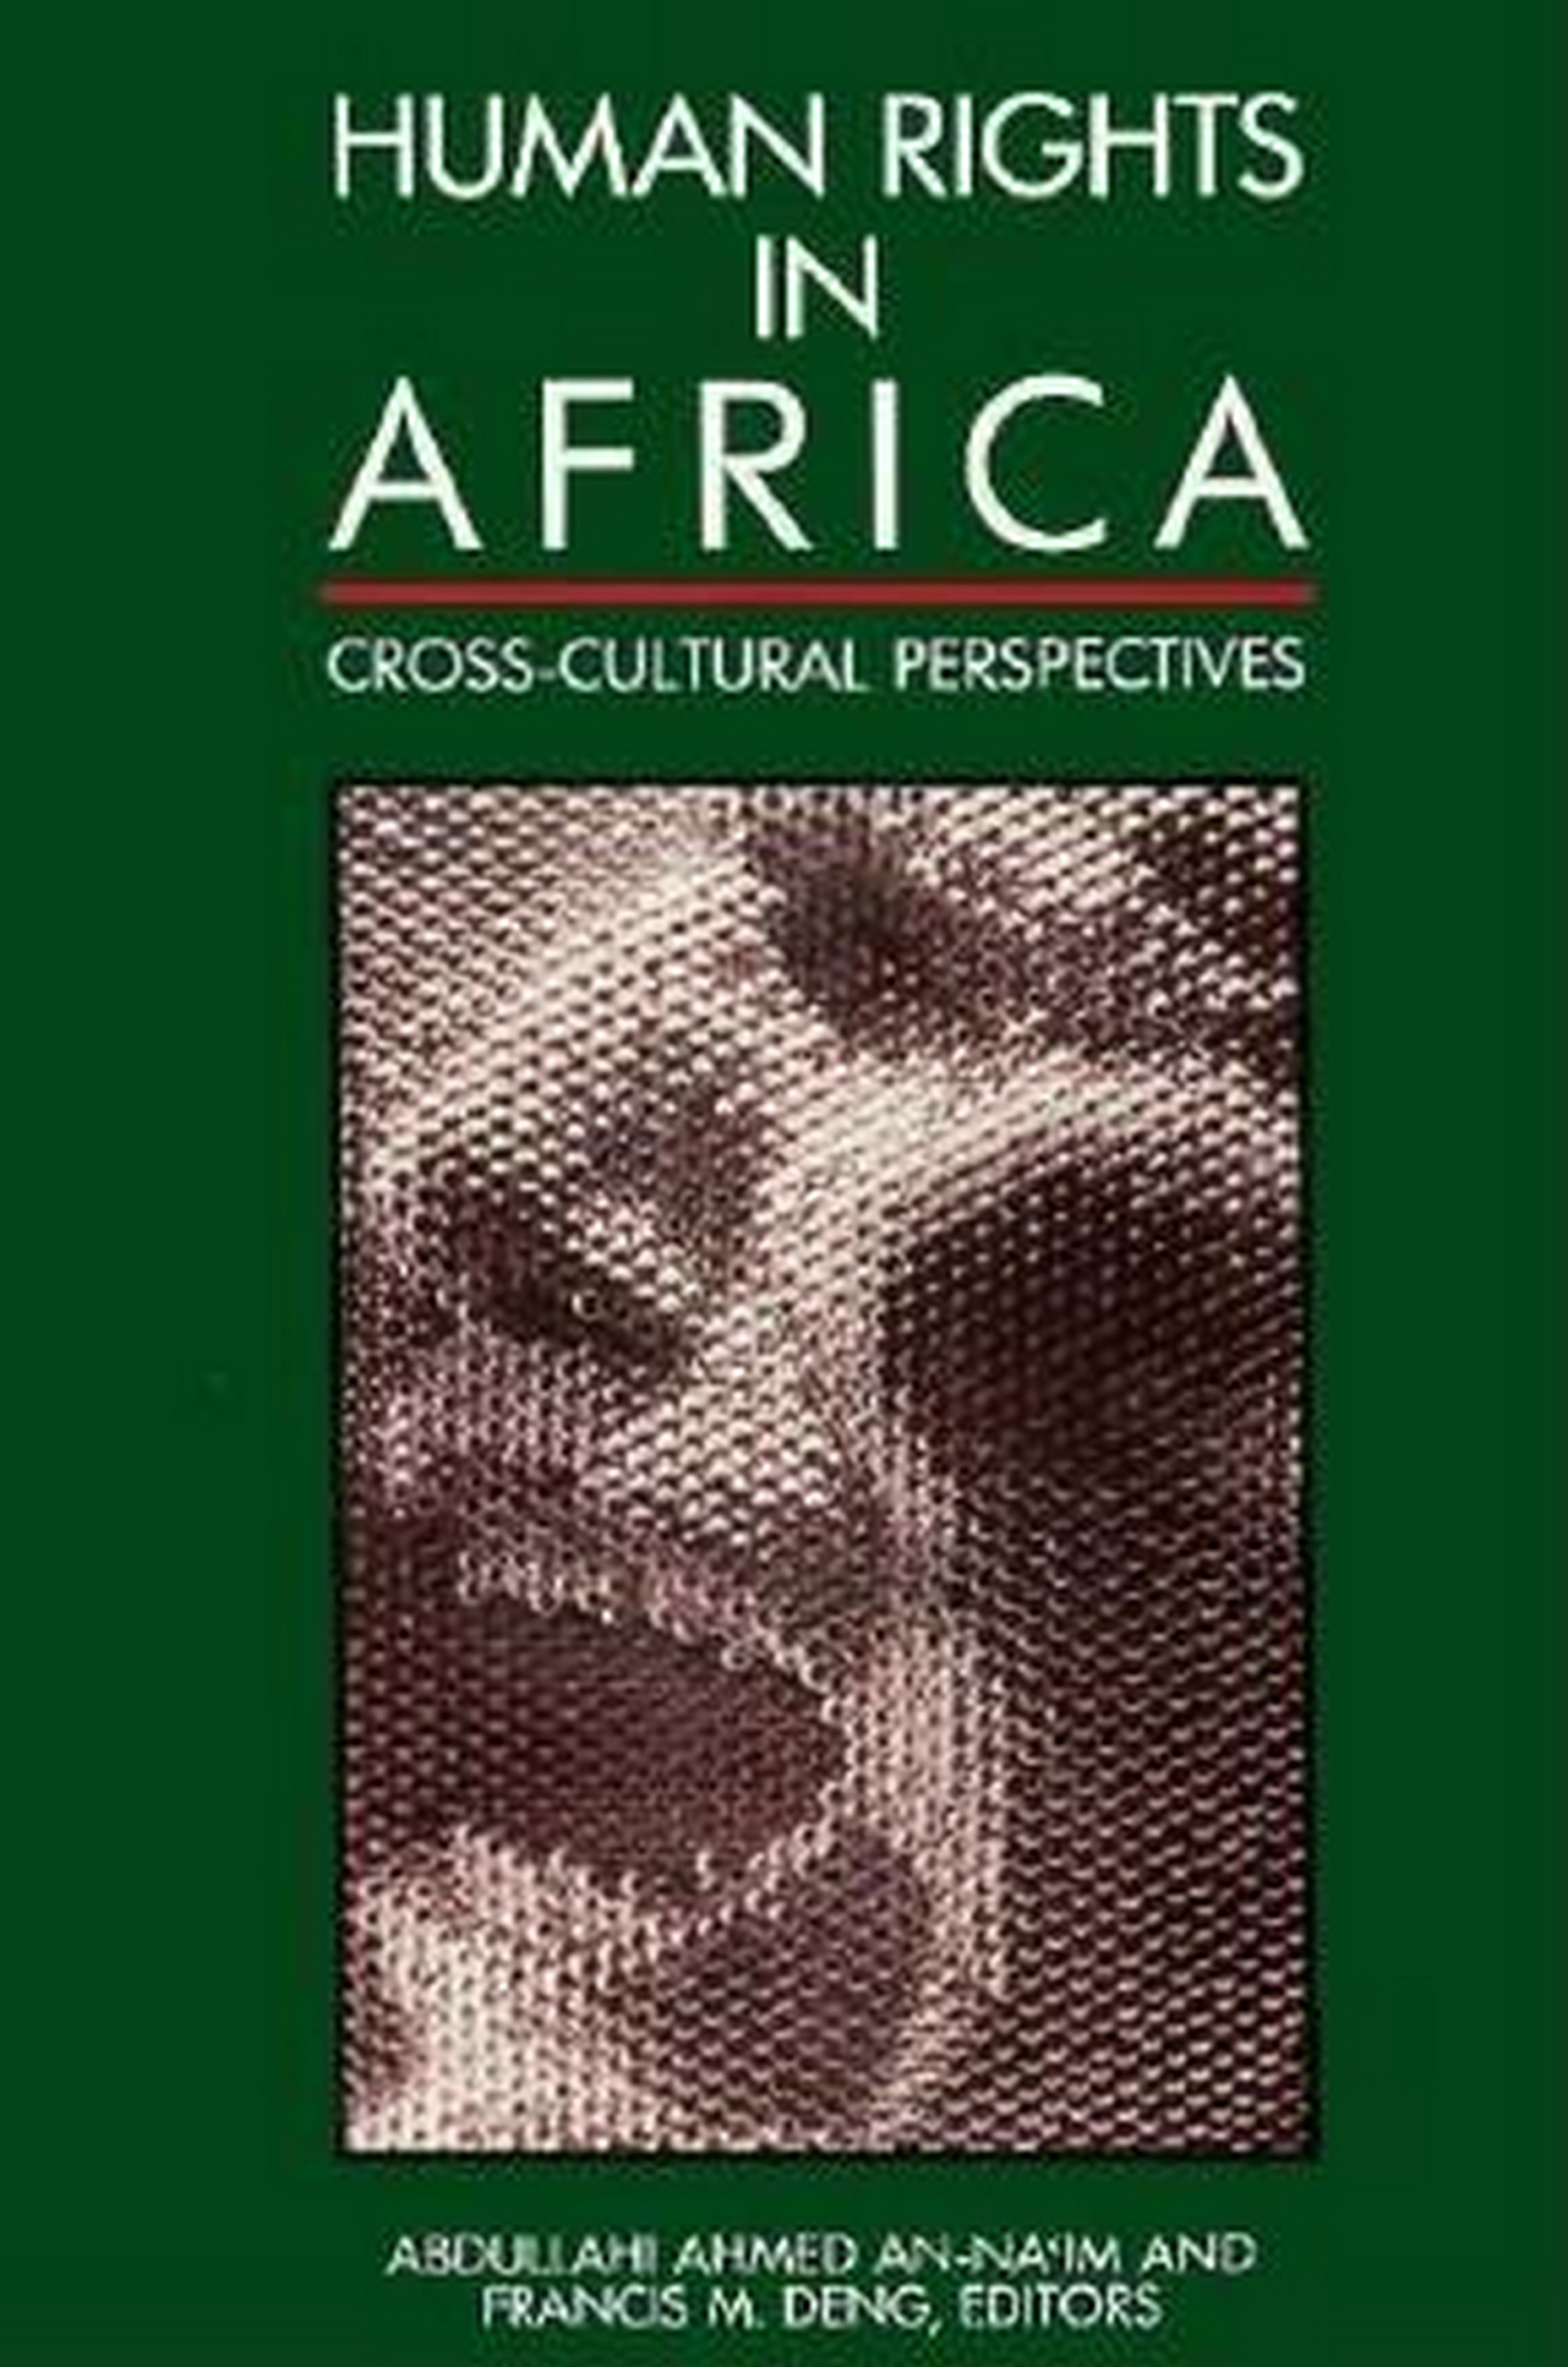 Human Rights in Africa: Cross-Cultural Perspectives